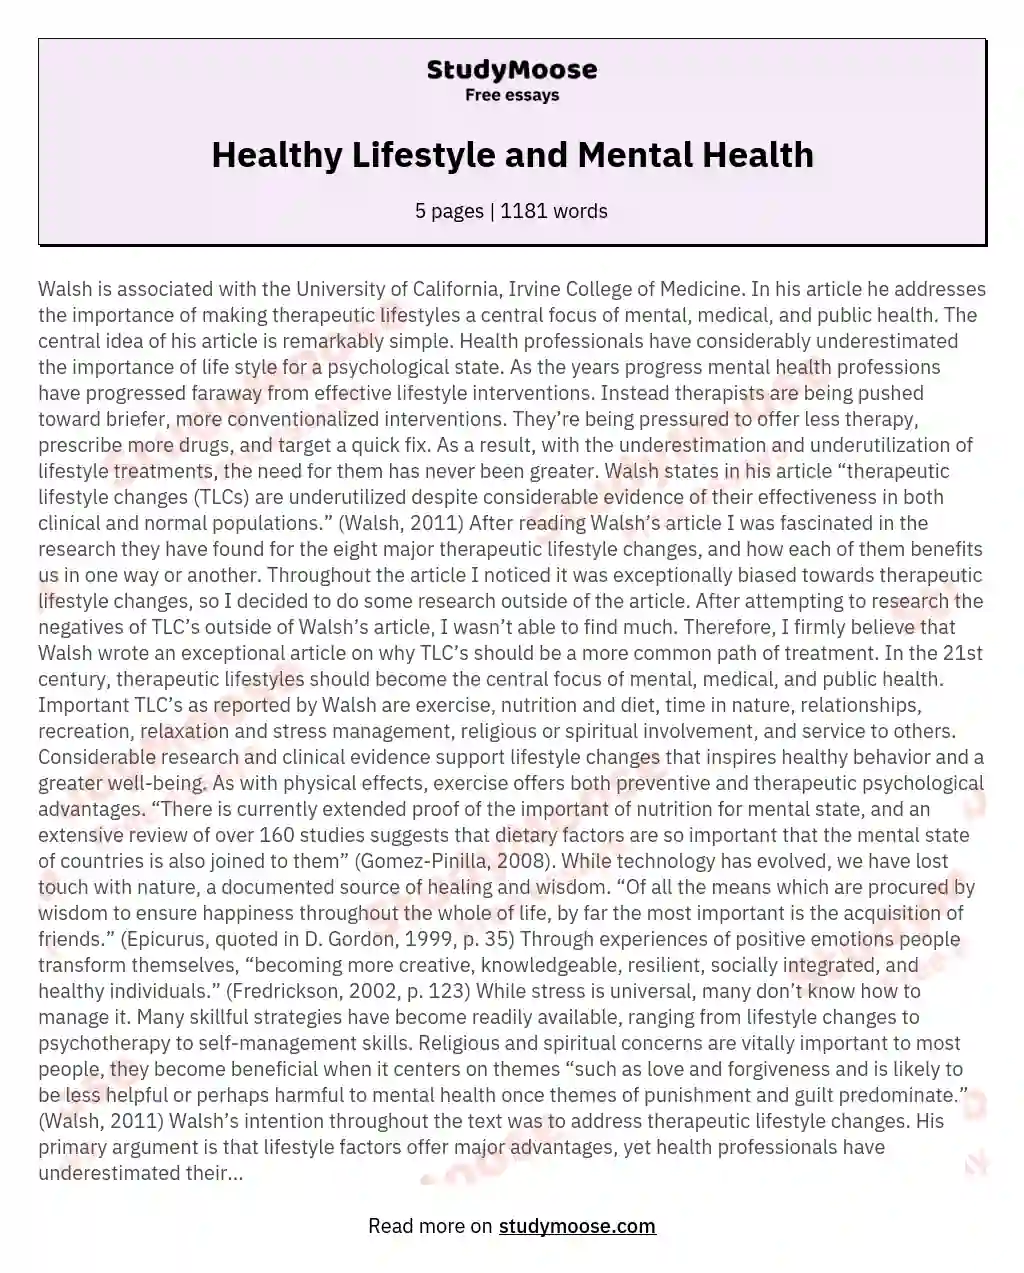 Healthy Lifestyle and Mental Health